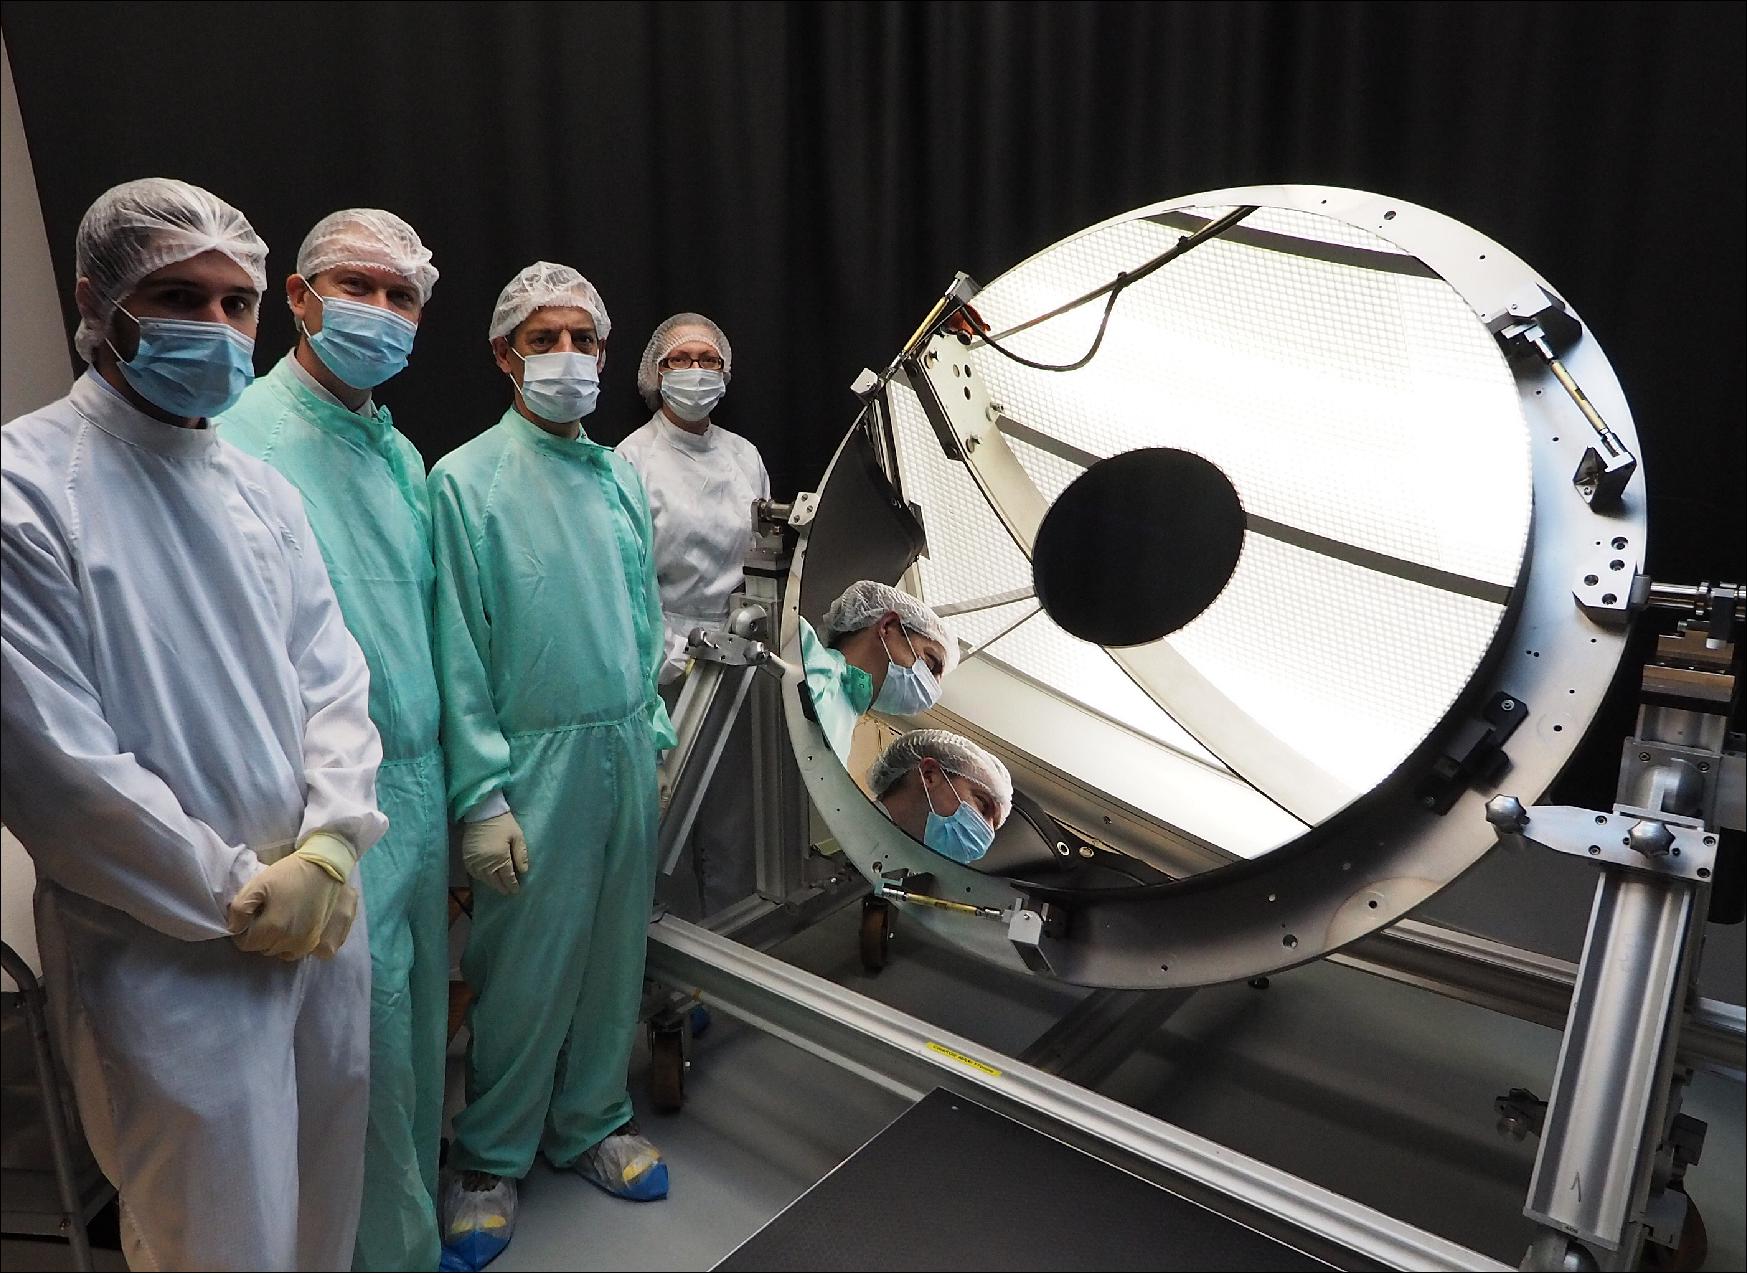 Figure 40: The primary mirror (M1) of the Euclid telescope, together with representatives of Safran Reosc, the mirror manufacturer, and Airbus Defence and Space, in charge of developing the spacecraft’s payload module, including the telescope (image credit: Safran Resoc)